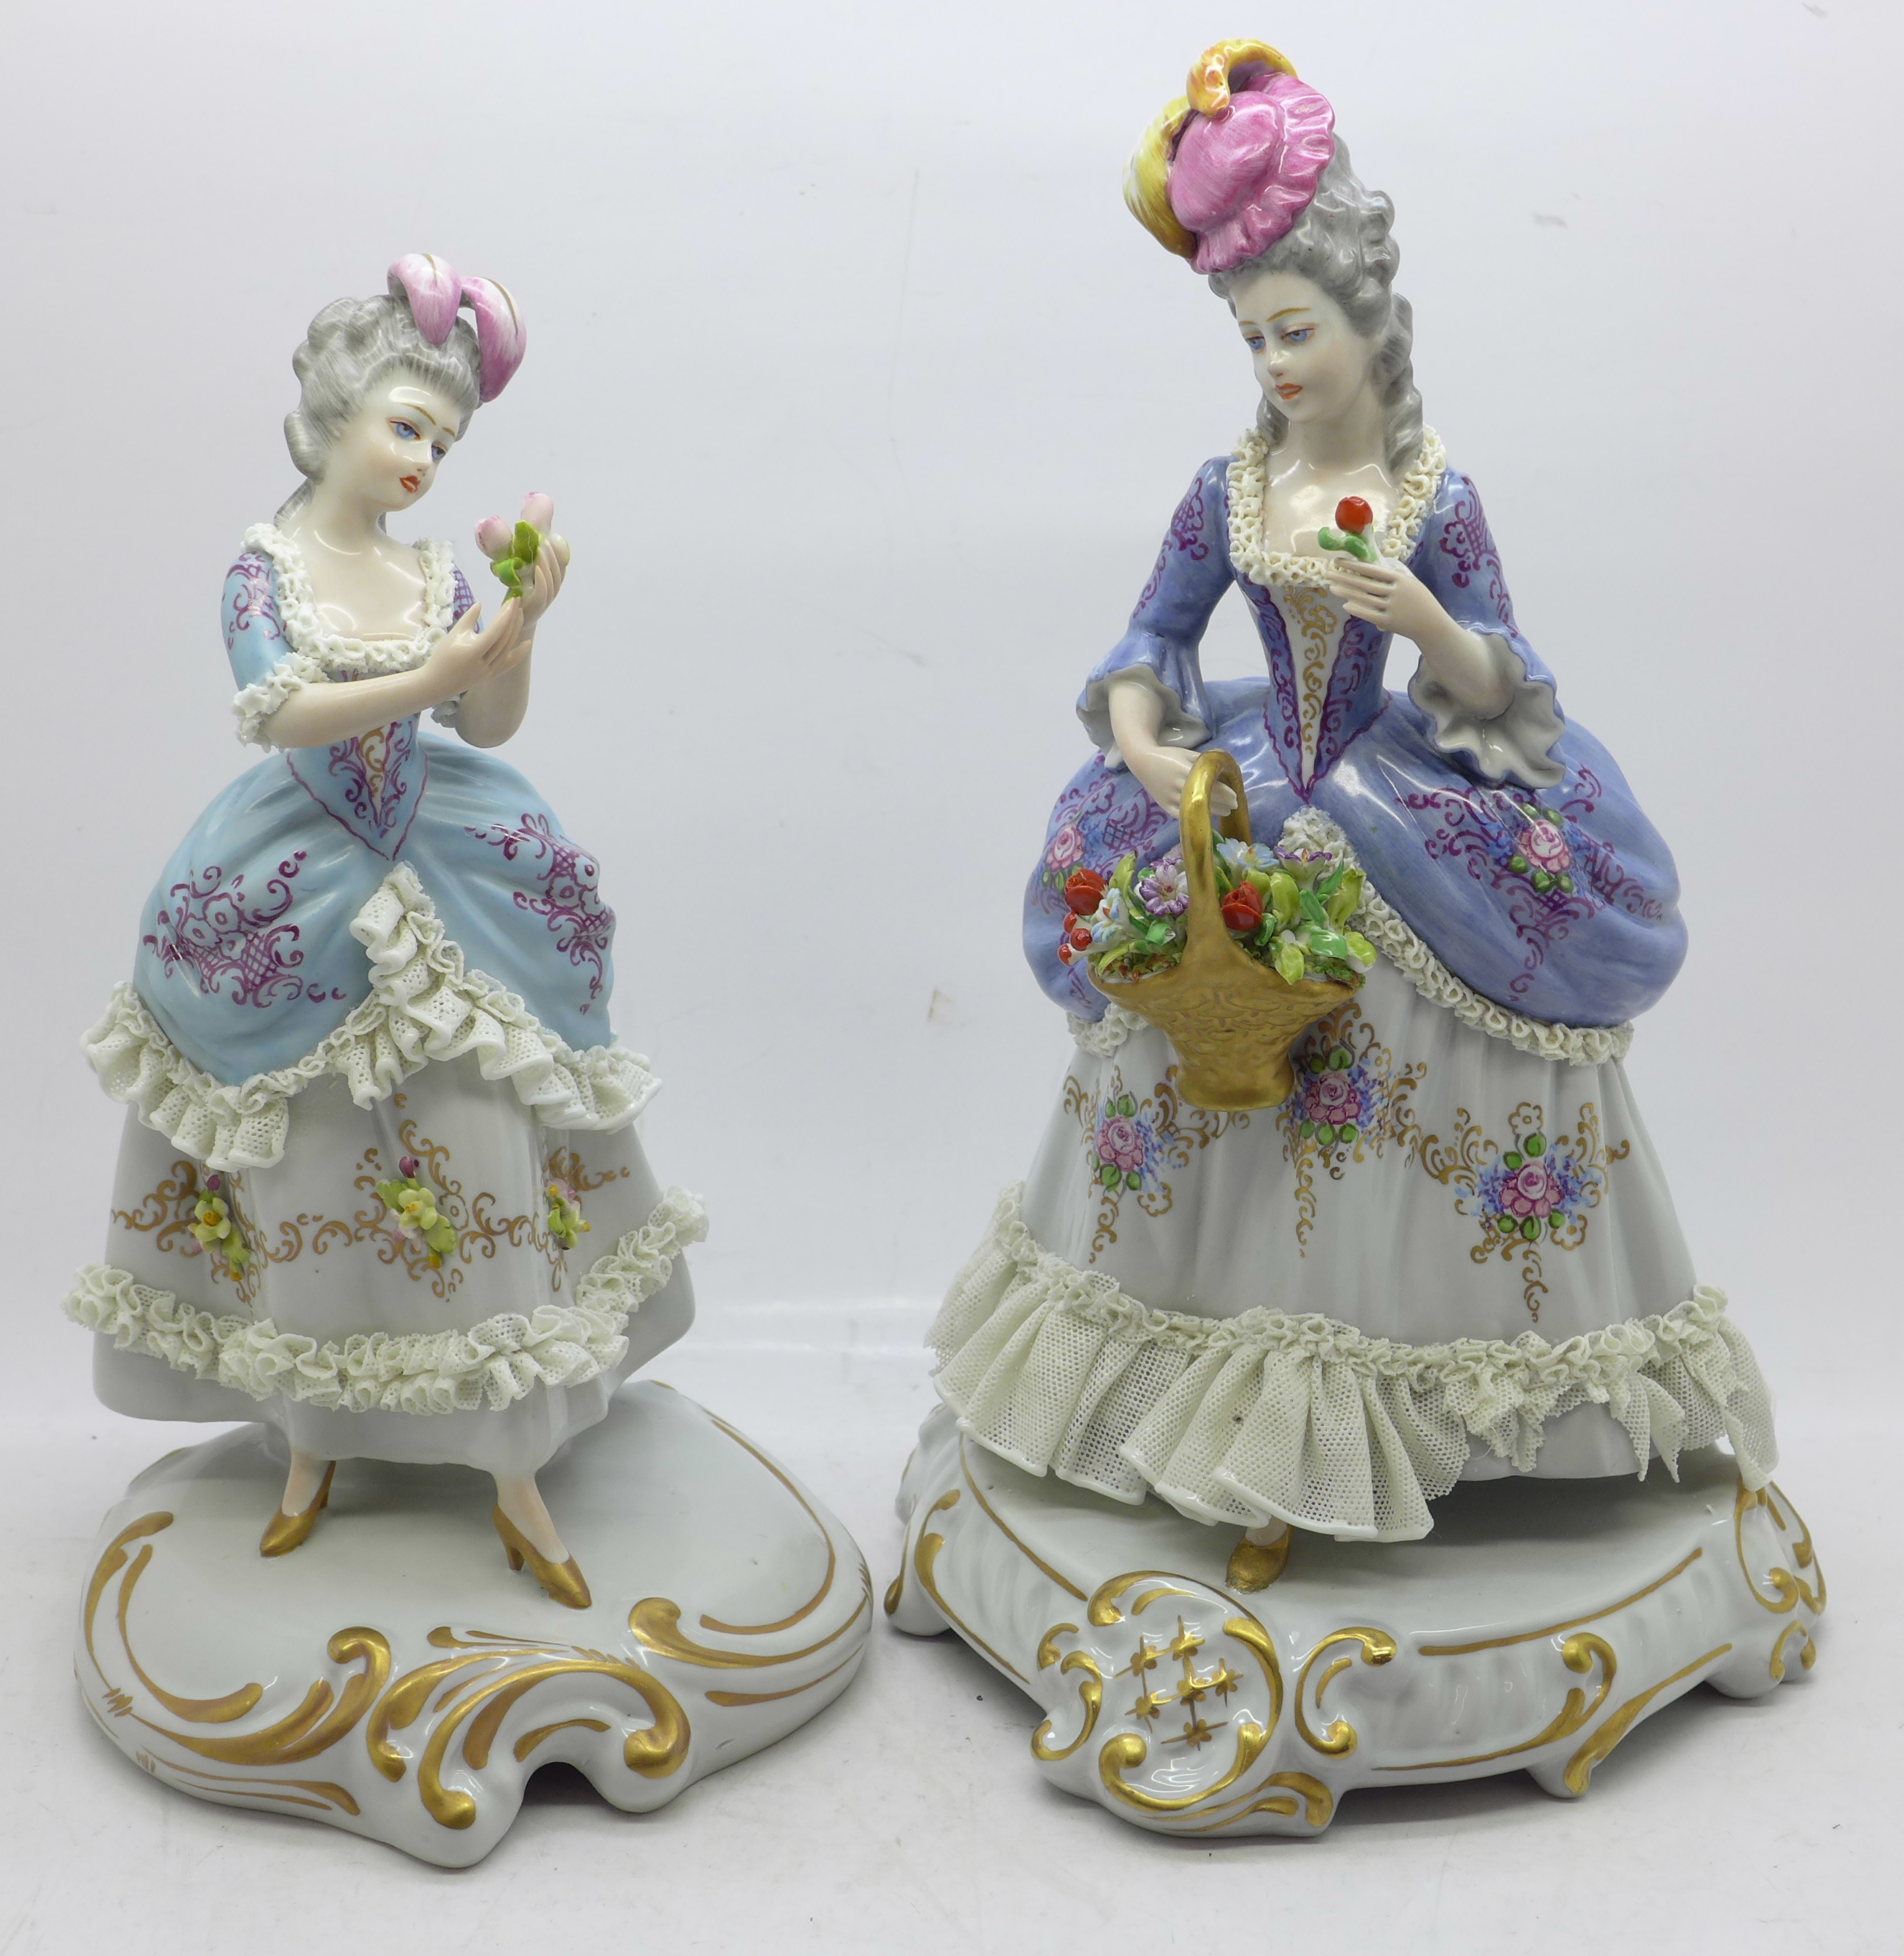 Two Capodimonte Neapolitan figures, some lace detailing a/f